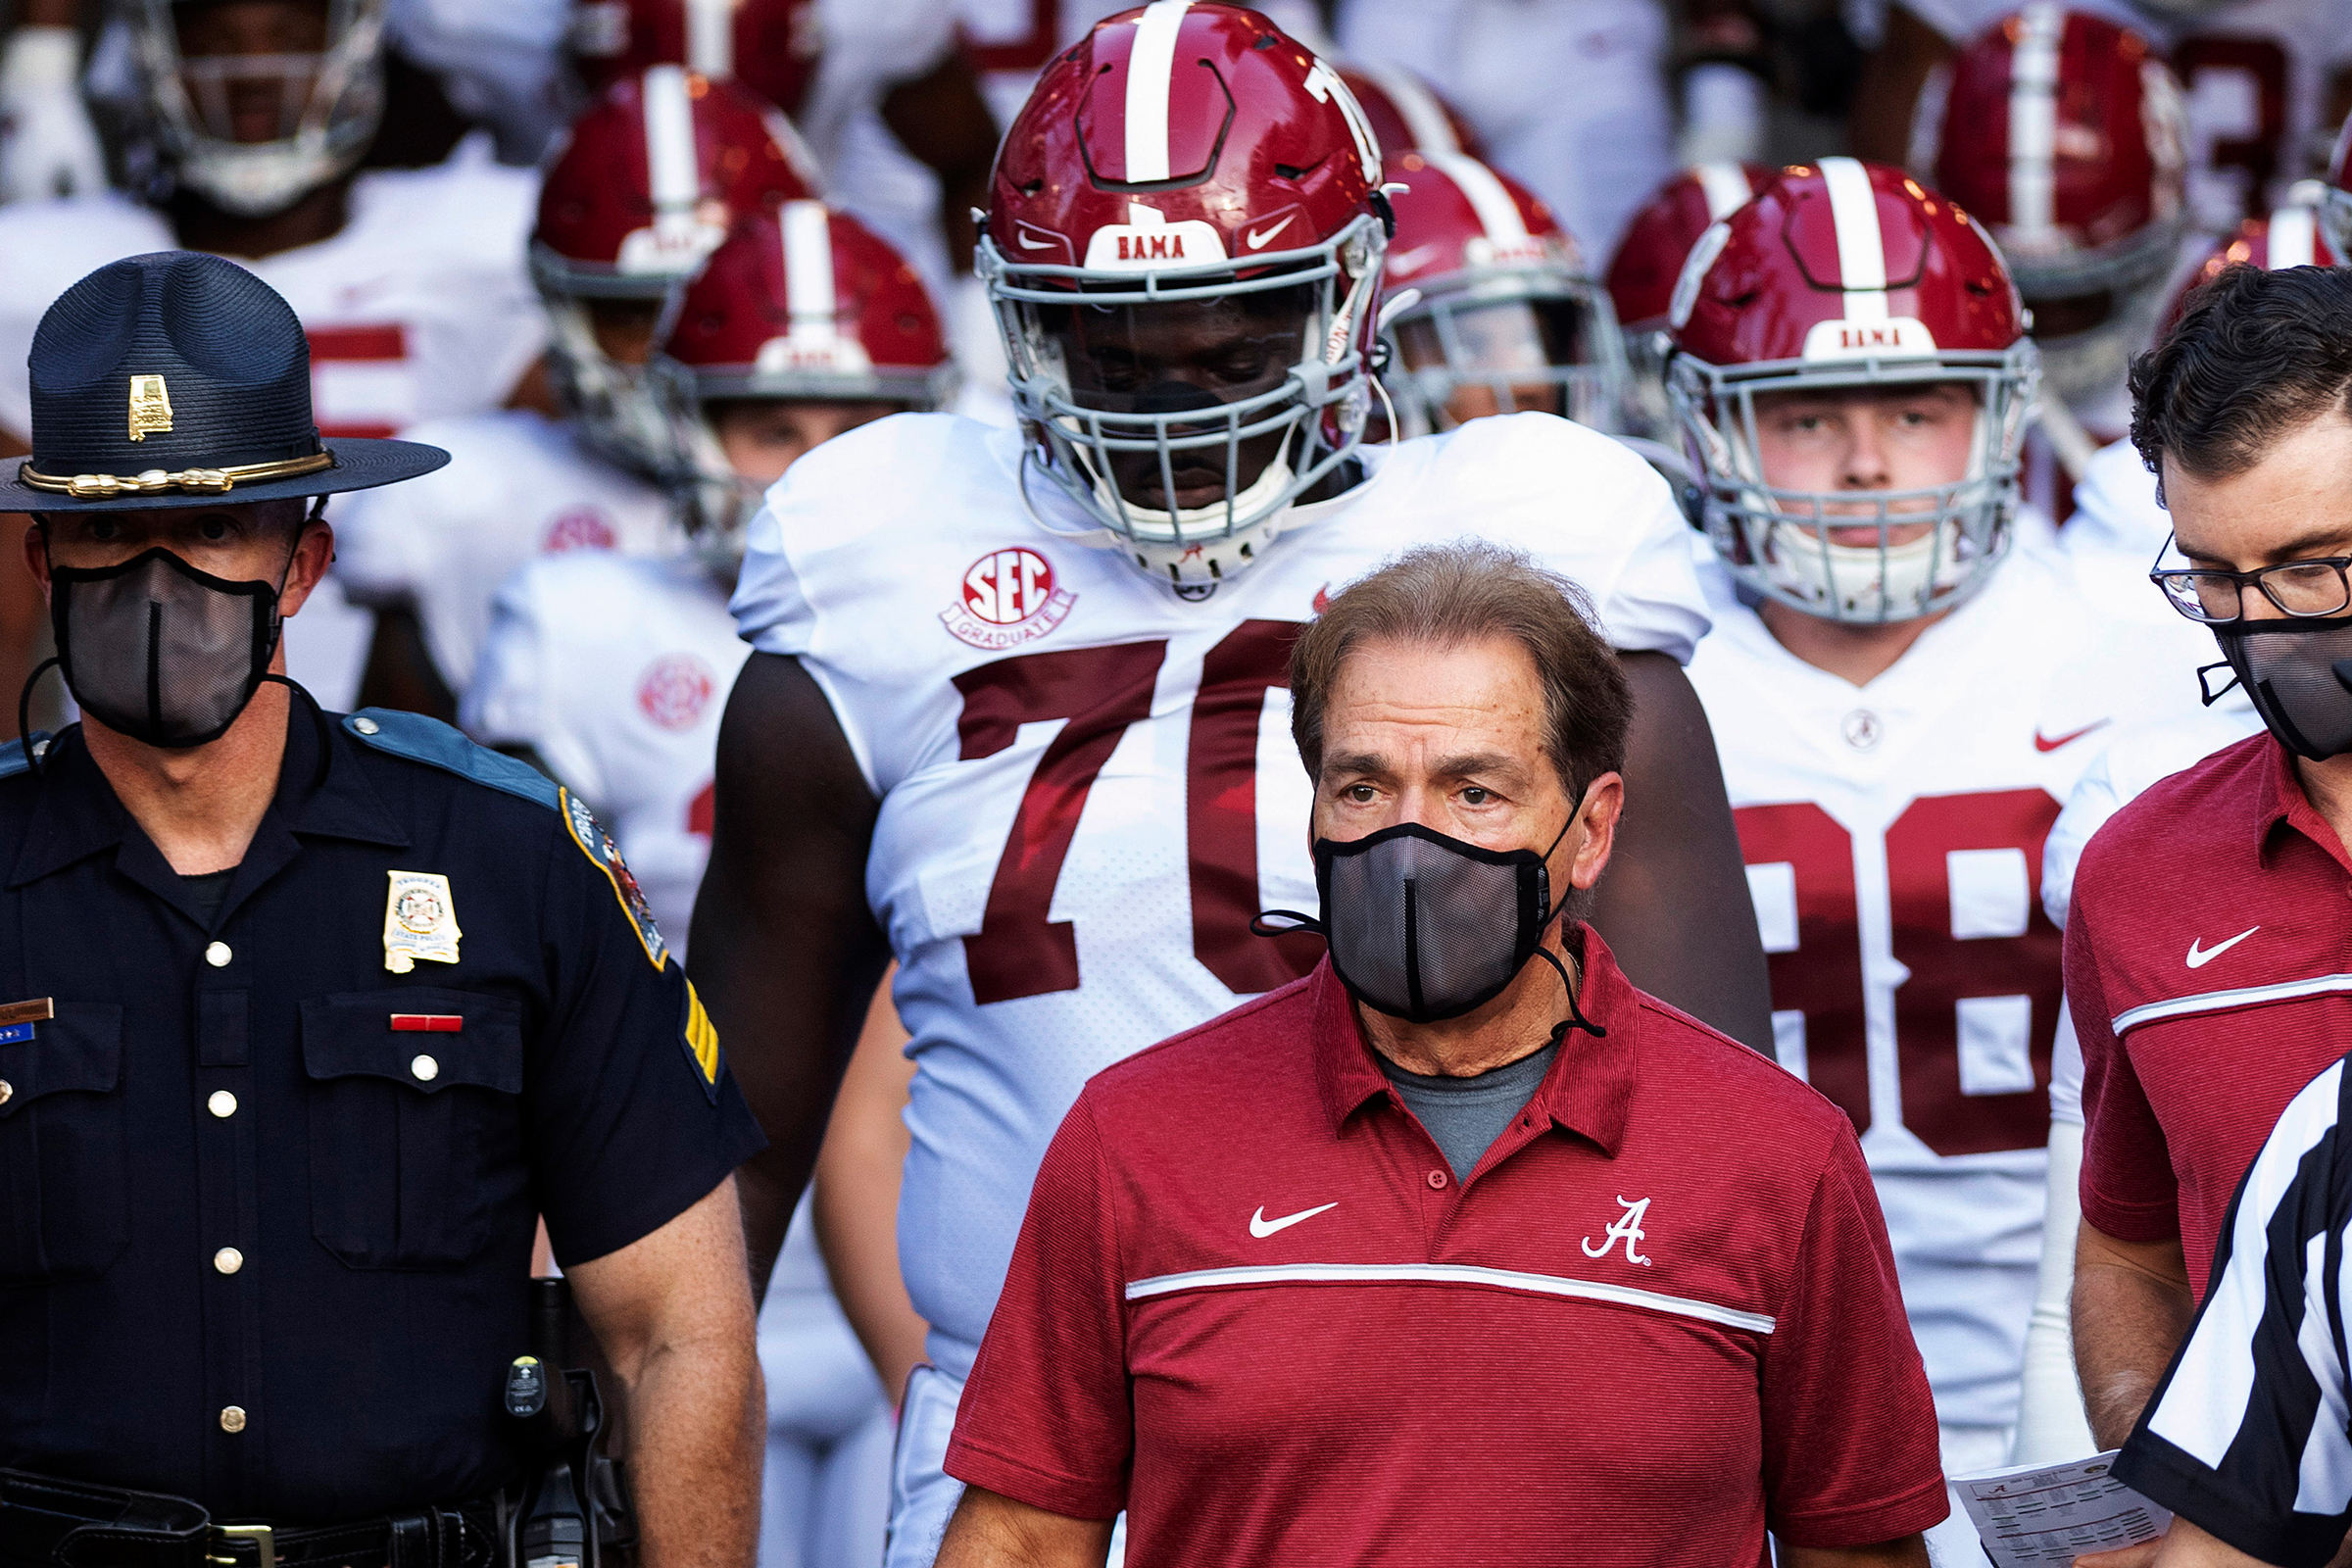 Alabama coach Nick Saban leads his team to the field before an NCAA college football game against Missouri in Columbia, Mo., on Sept. 26, 2020. Saban and athletic director Greg Byrne tested positive for COVID-19, days before the Southeastern Conference's biggest regular-season showdown. (L.G. Patterson—AP)